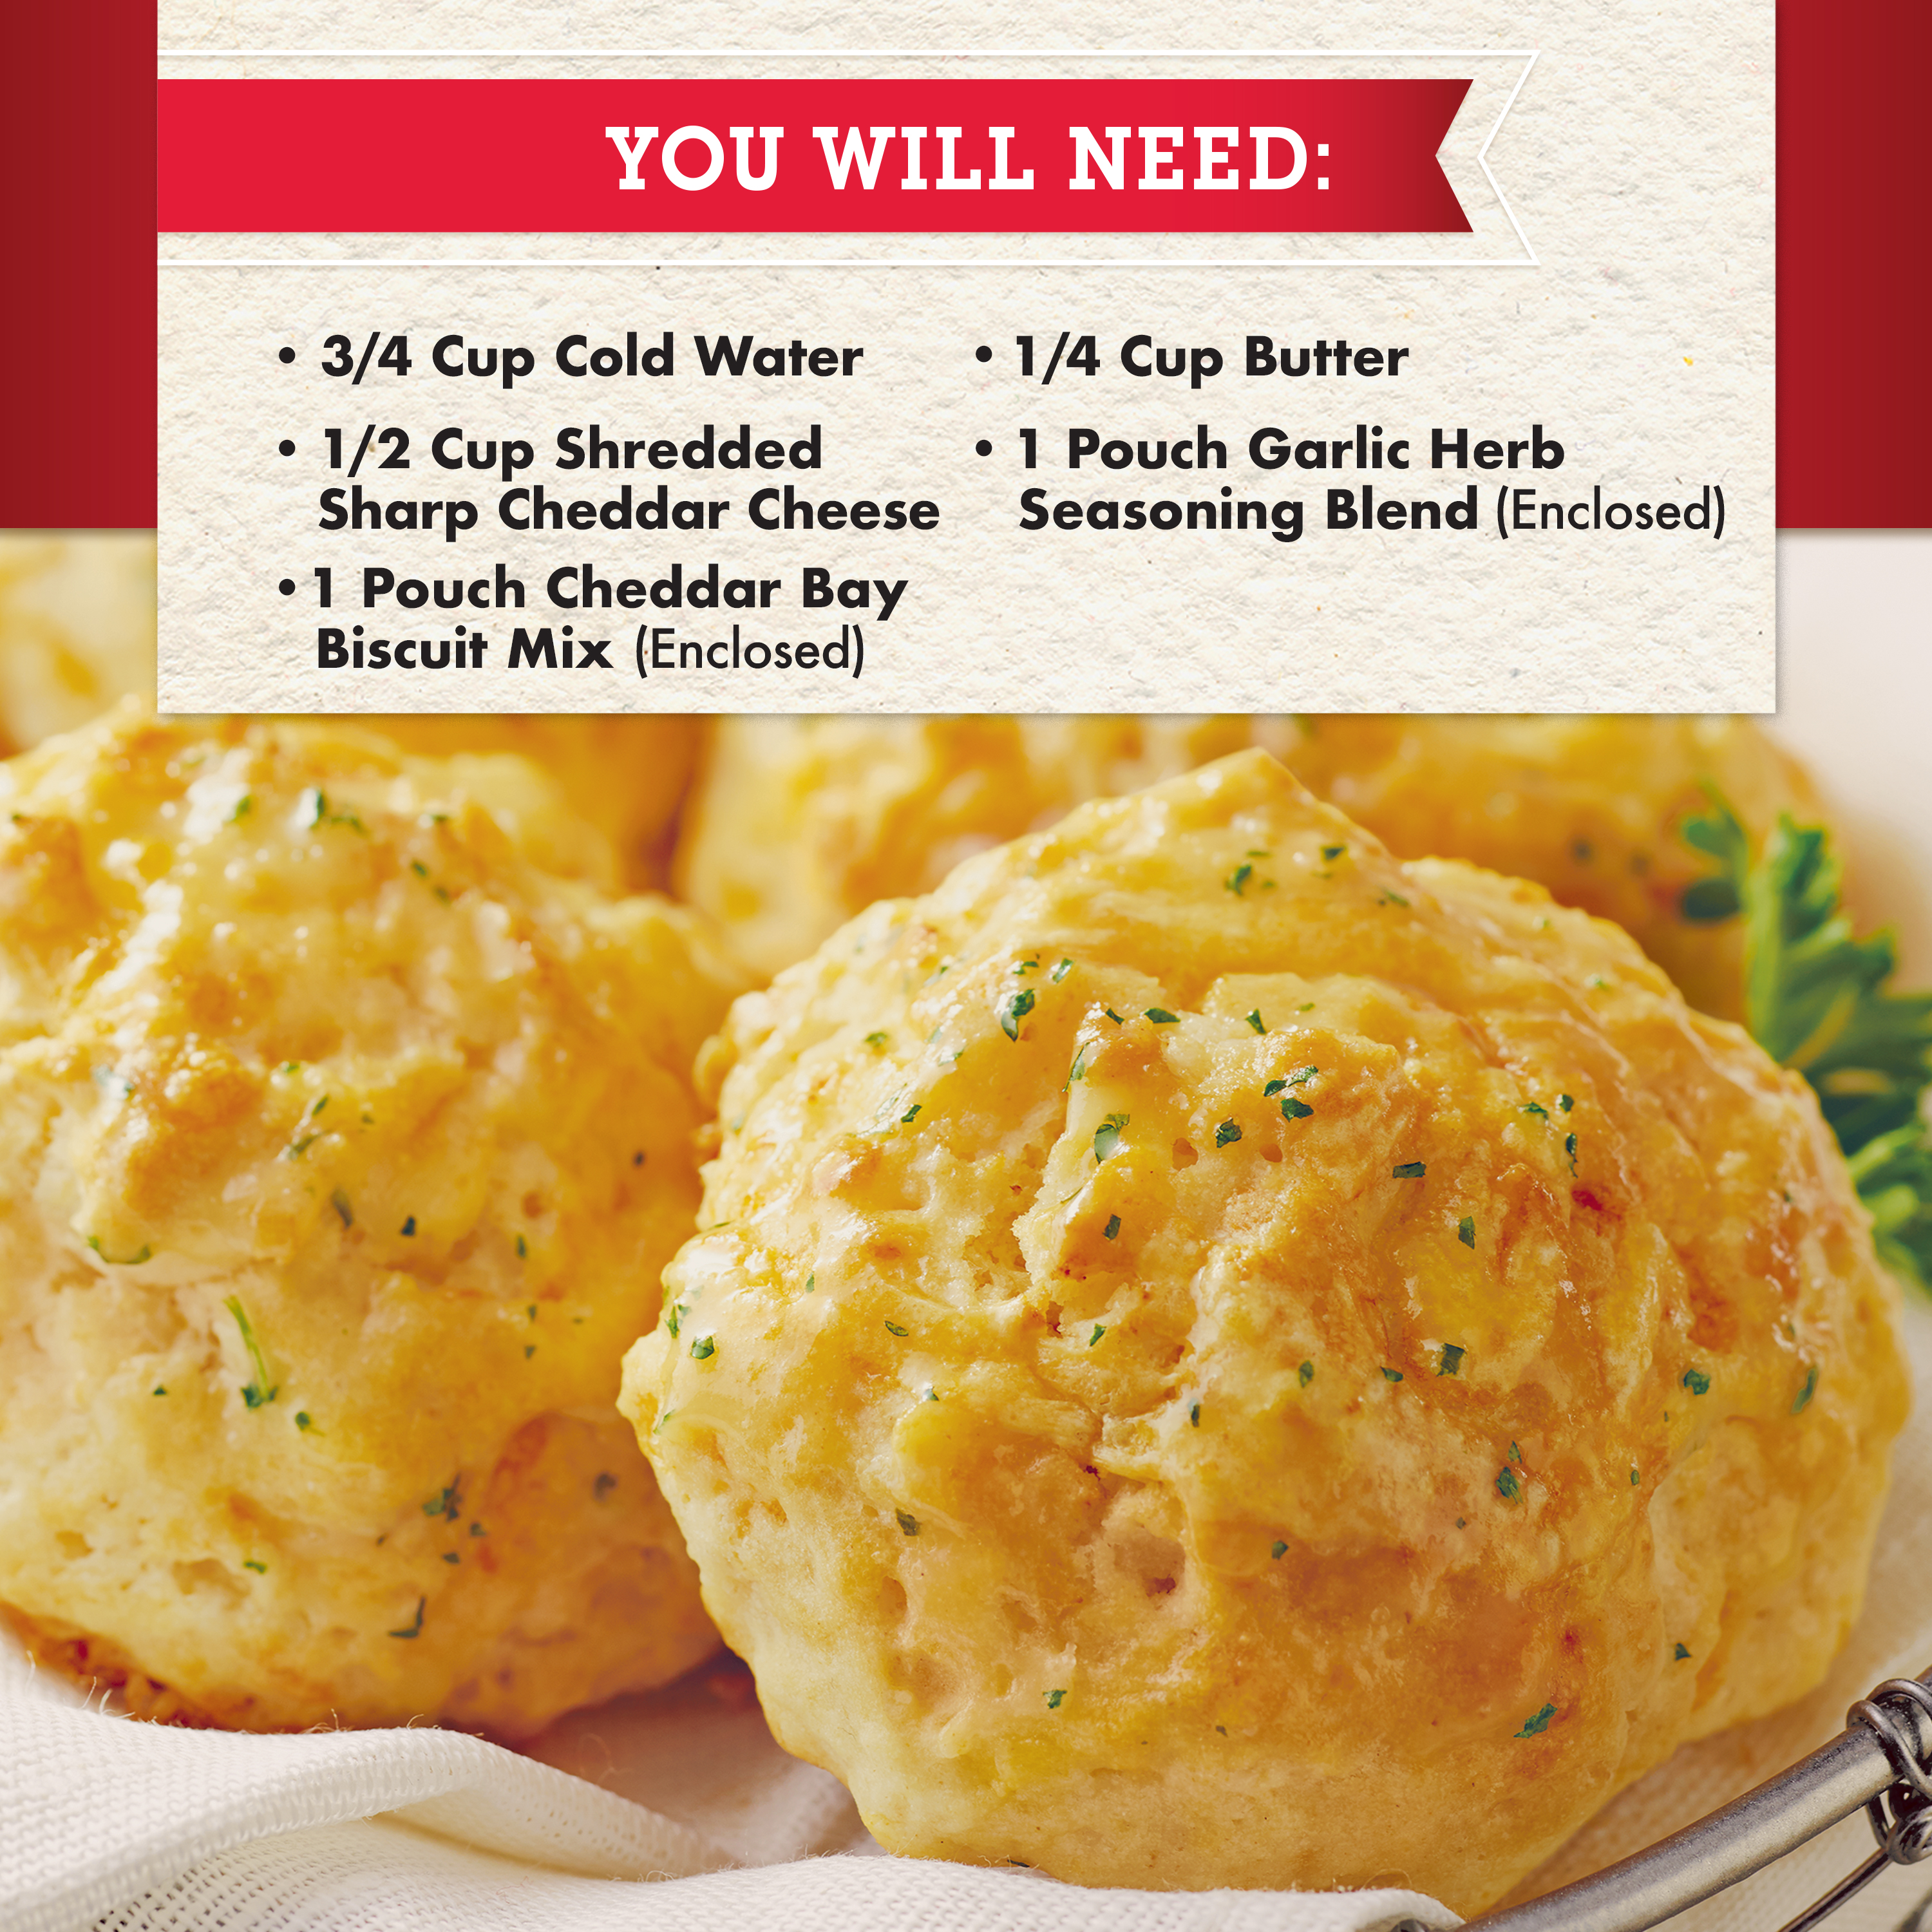 Red Lobster Cheddar Bay Biscuit Mix, Makes 10 Biscuits, 11.36 oz Box - image 4 of 10